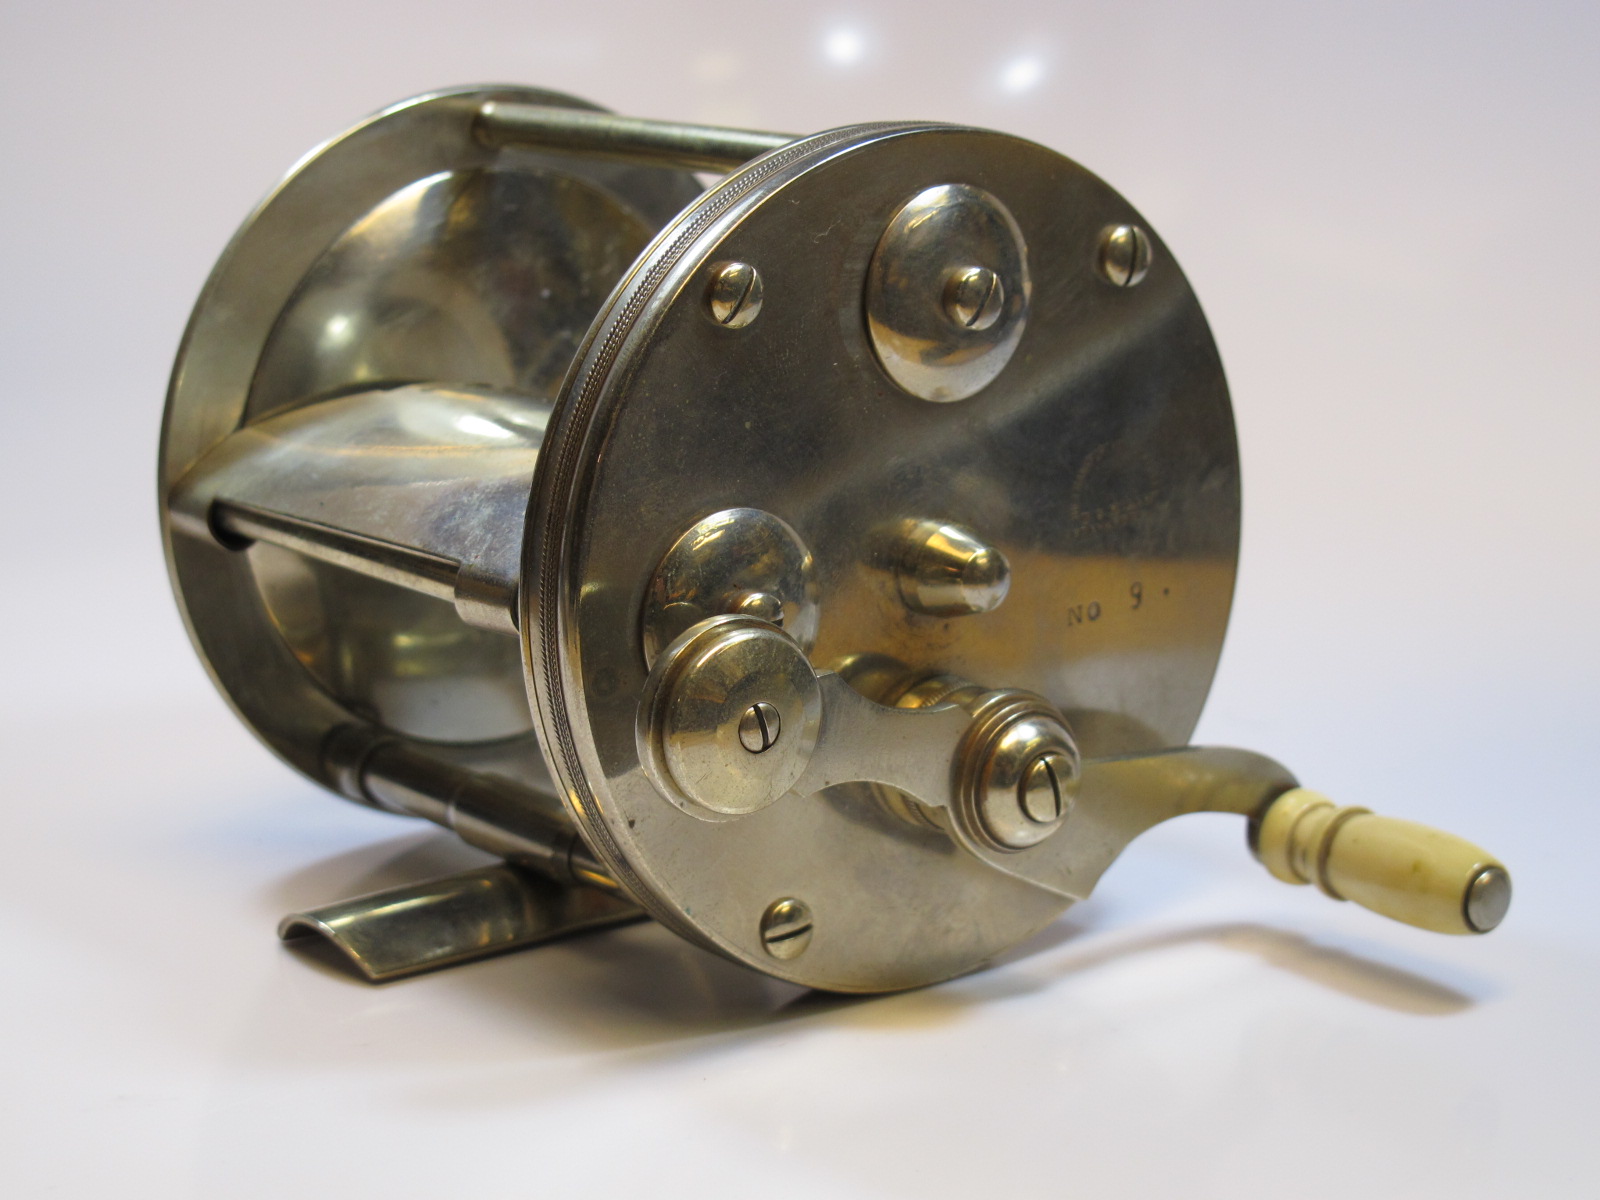 Collectible Vintage Fishing Reels - 7 For Sale on 1stDibs  vintage fishing  reels worth money, most collectible vintage fishing reels, most valuable  vintage fishing reels